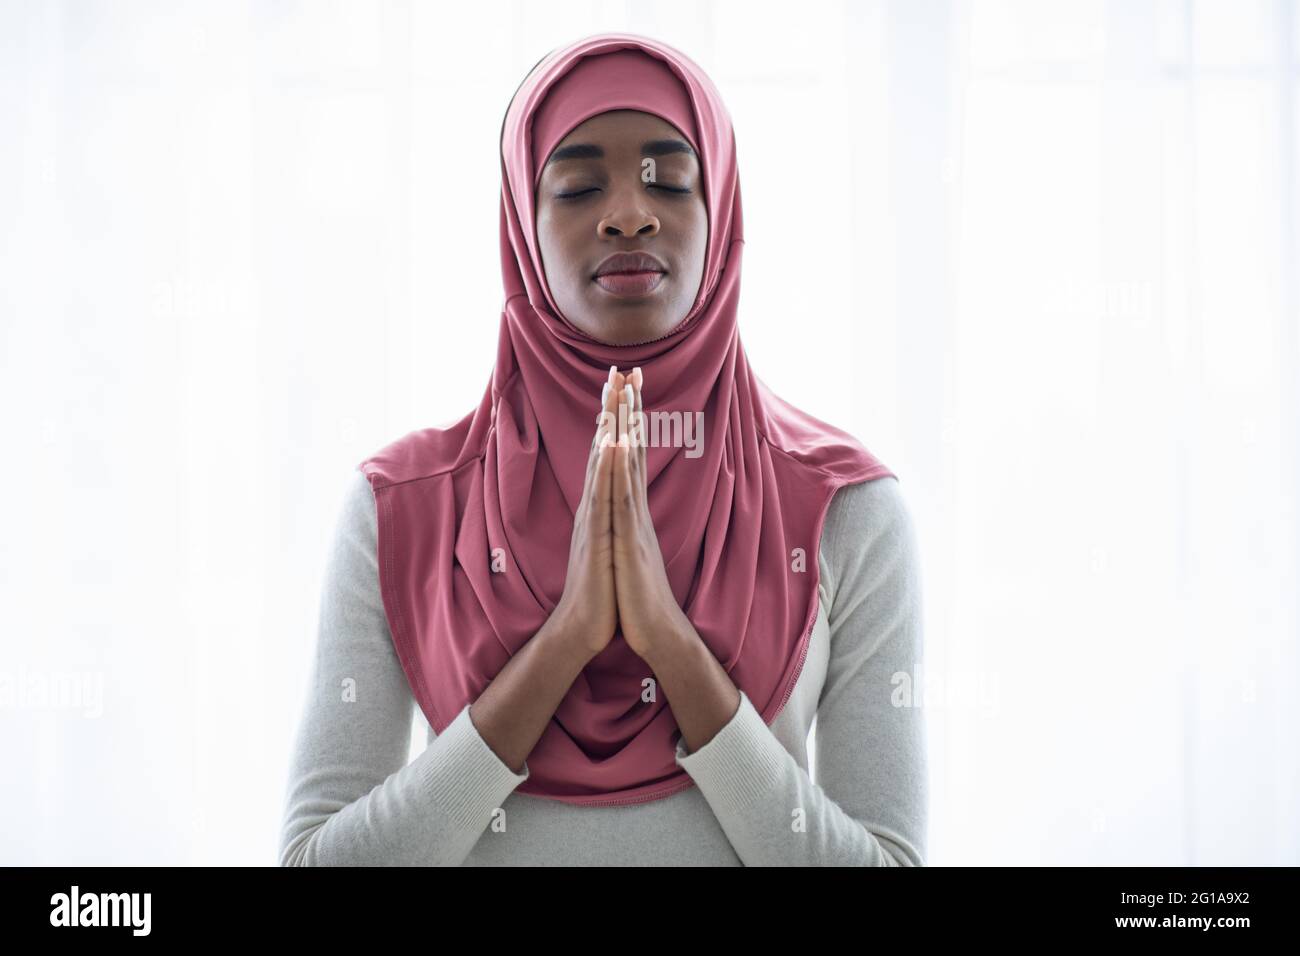 Portrait Of Black Muslim Lady Praying With Clasped Hands And Closed Eyes Stock Photo